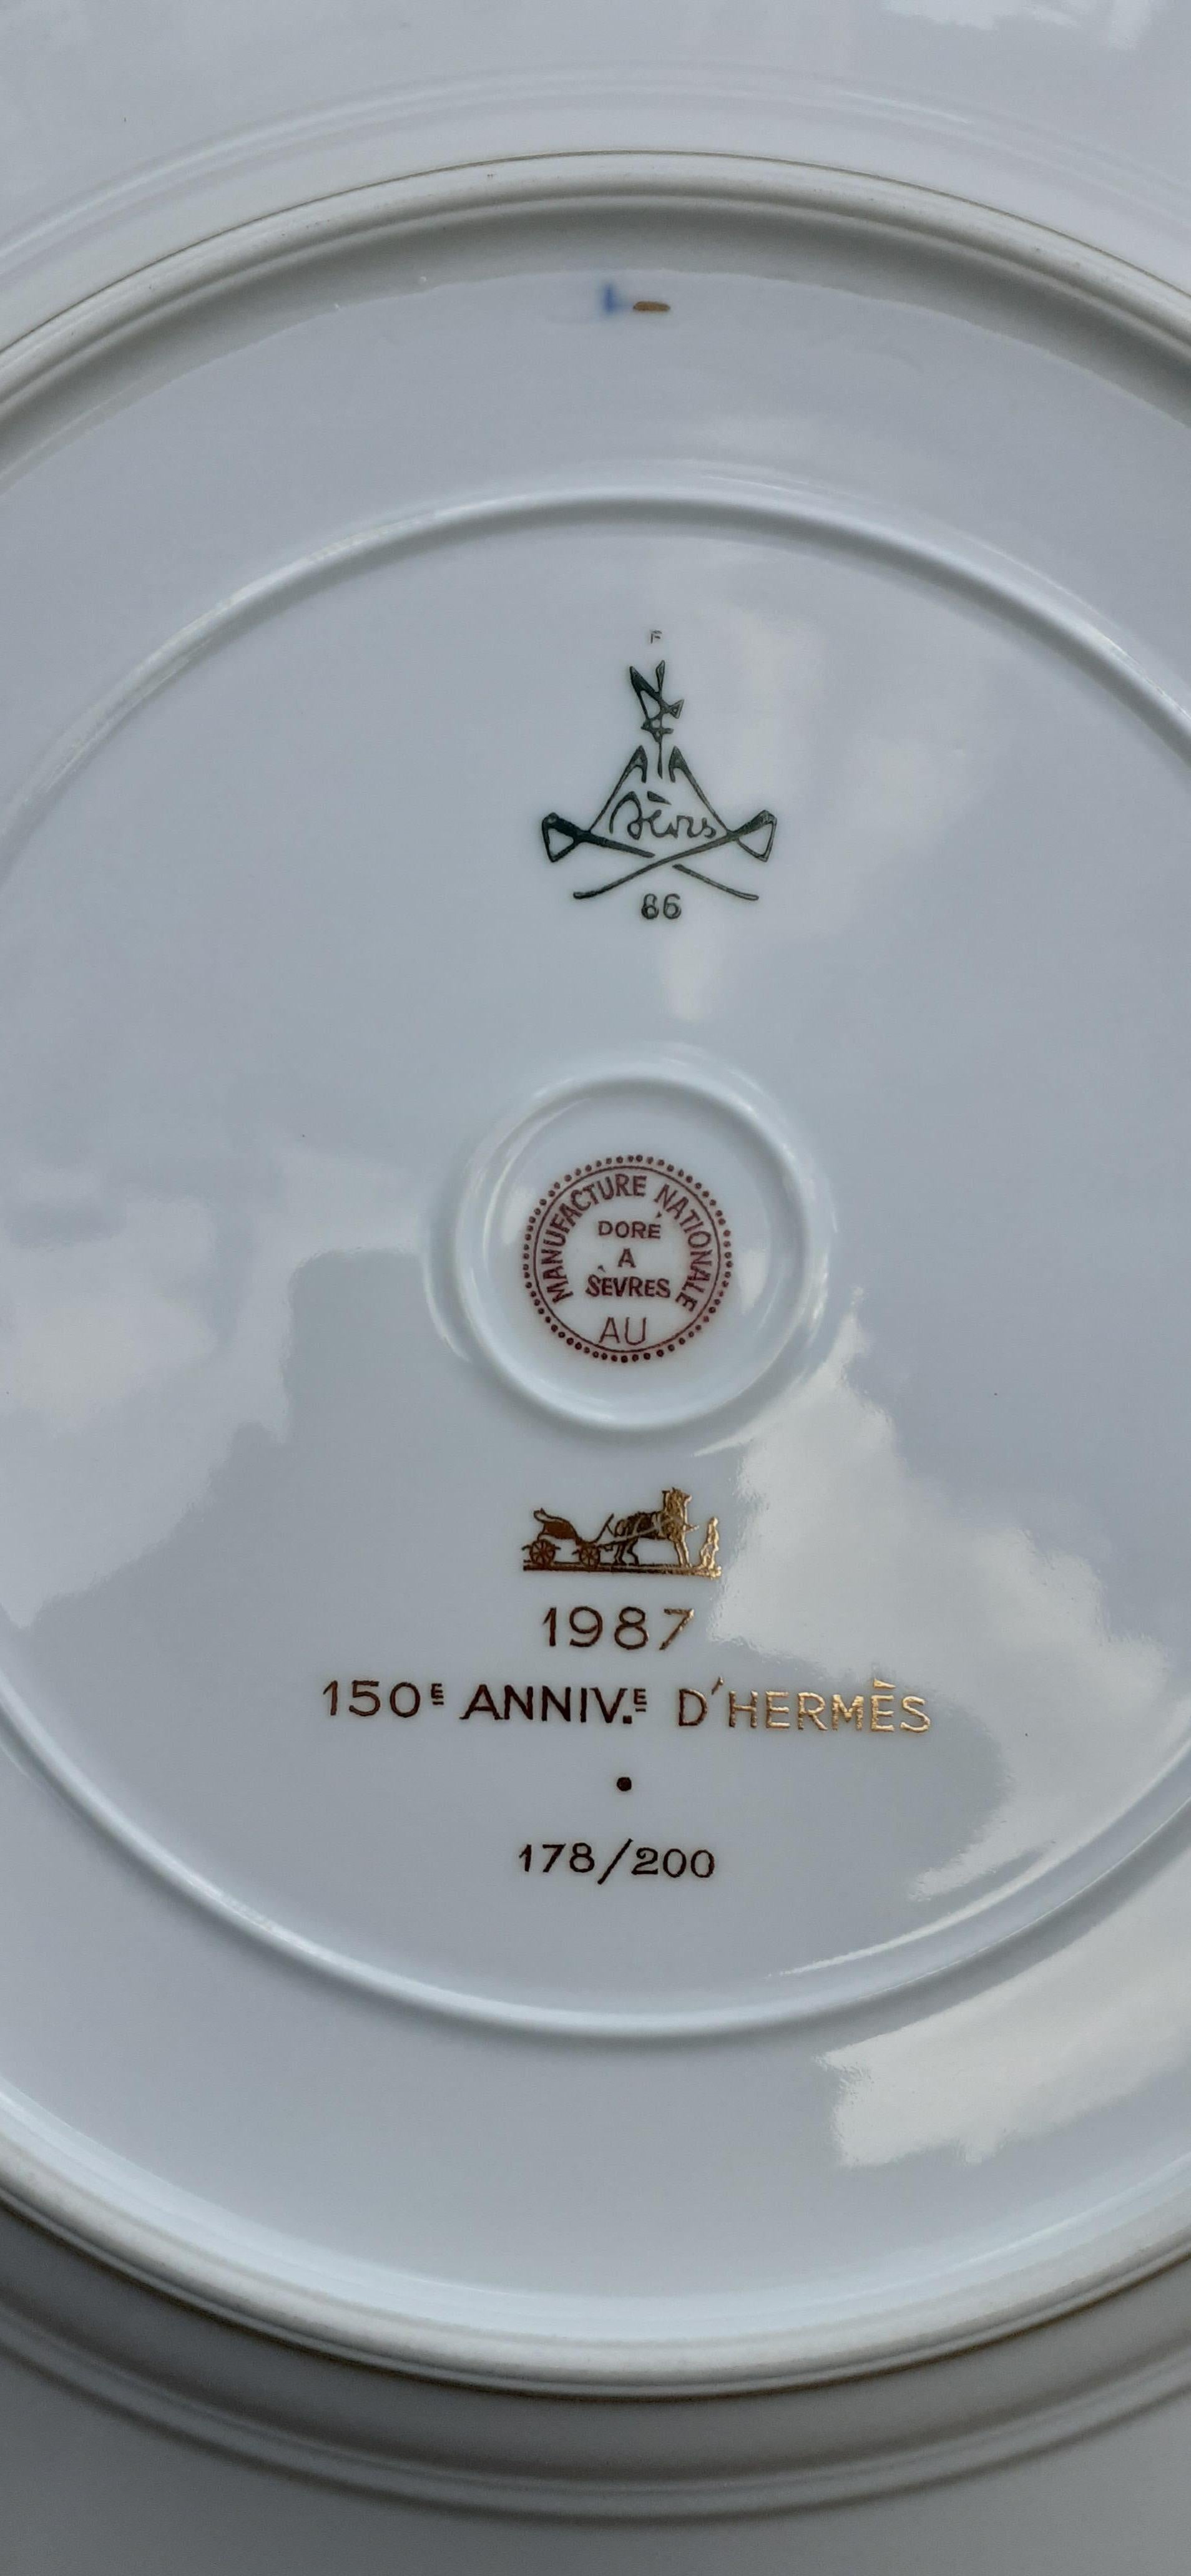 Exceptional Hermès Plate Dish Feux d'Artifice 150th Anniversary Only 200 Pieces For Sale 5